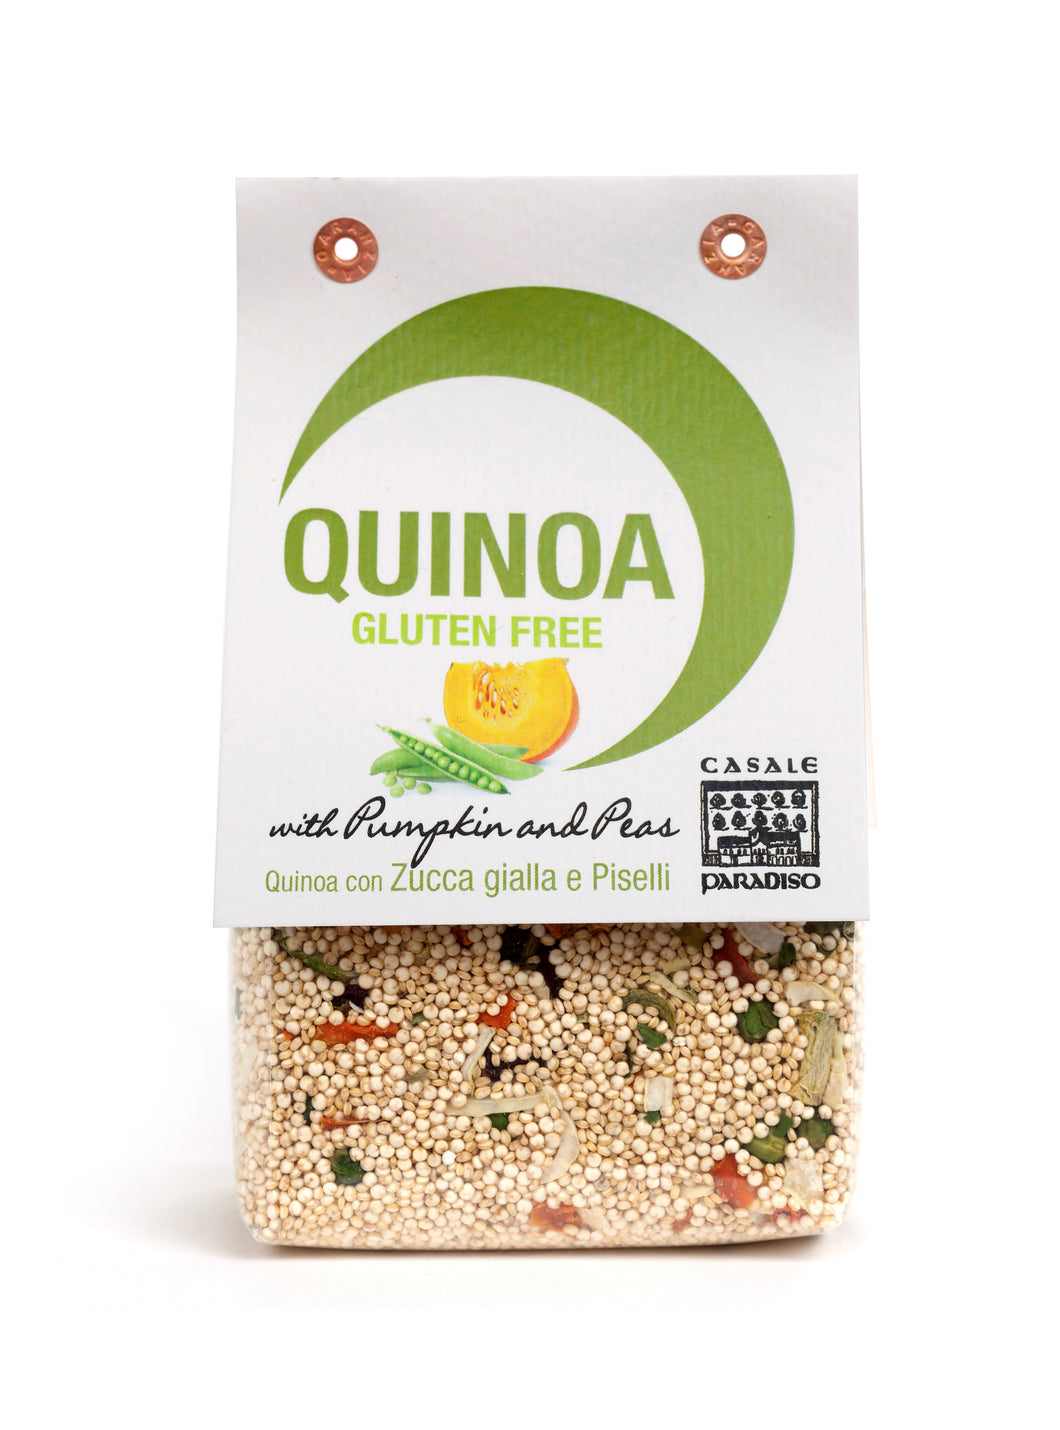 Quinoa with Pumpkin and Peas , By Casale Paradiso 7 oz